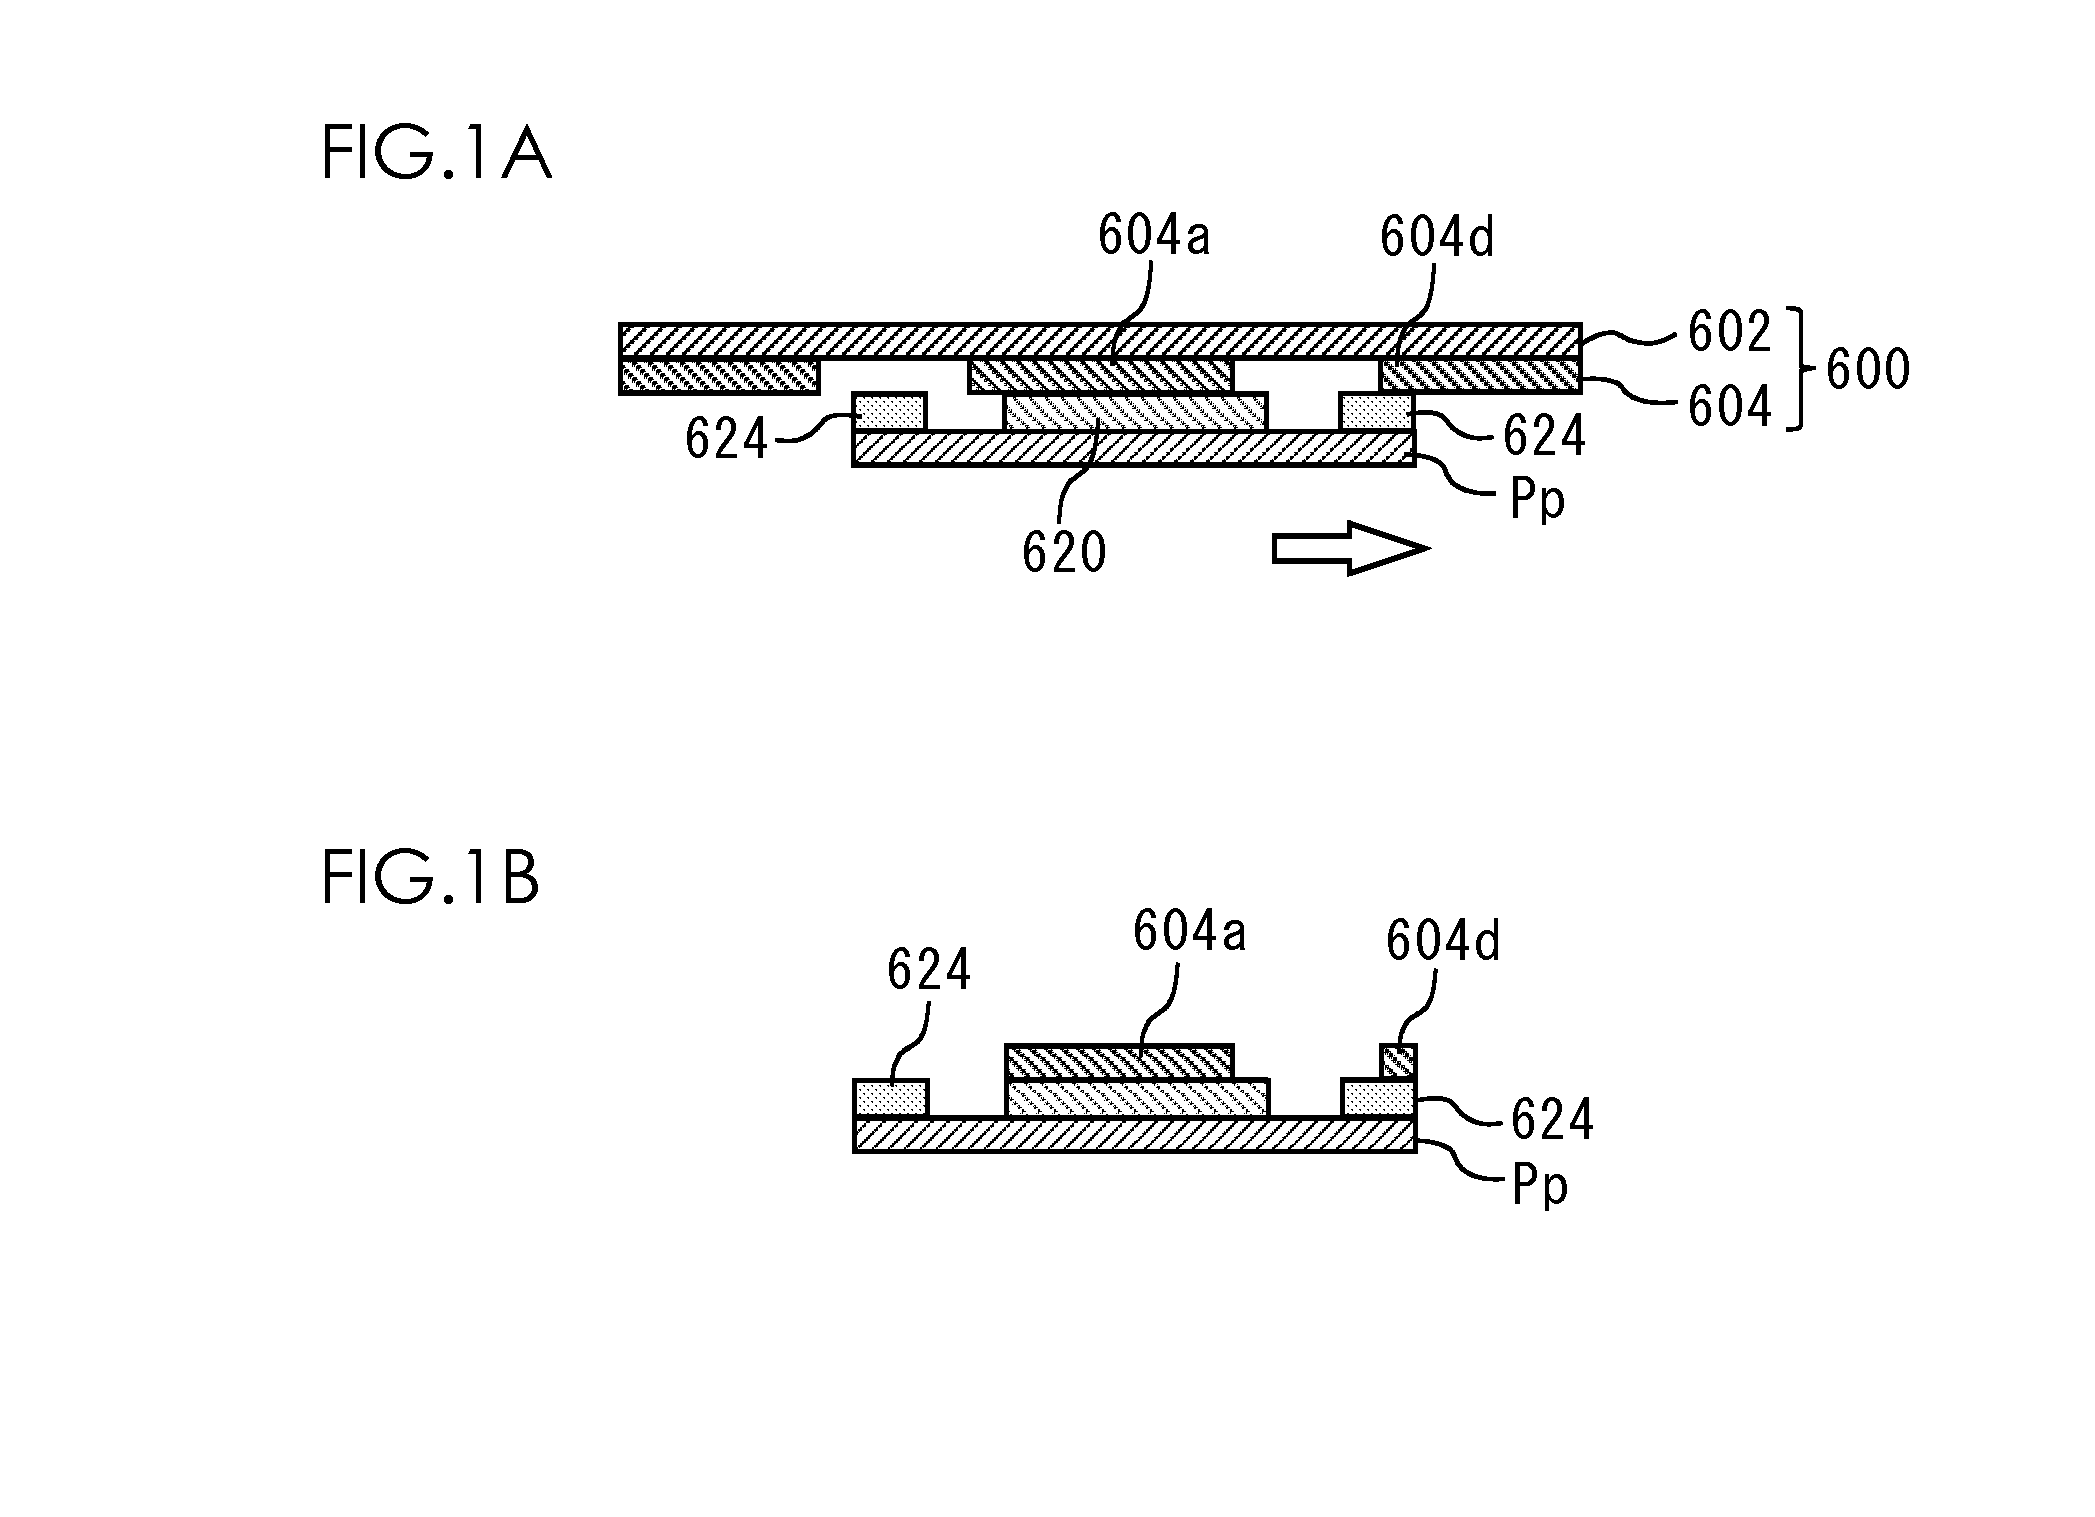 Image forming system